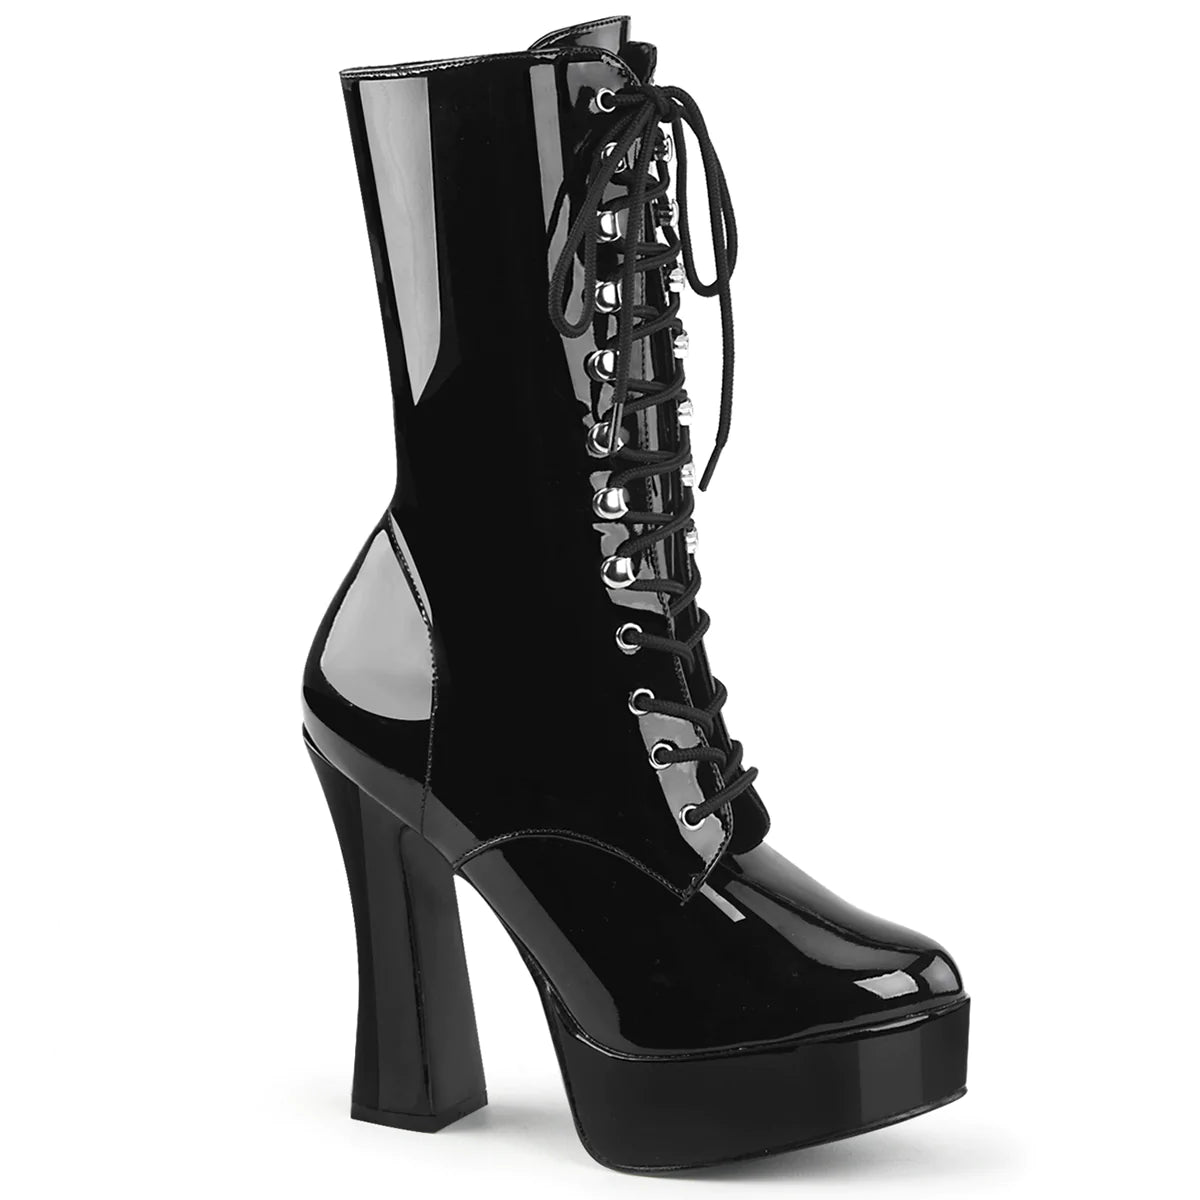 The right side of the black, patent leather Electra Ankle Boot.